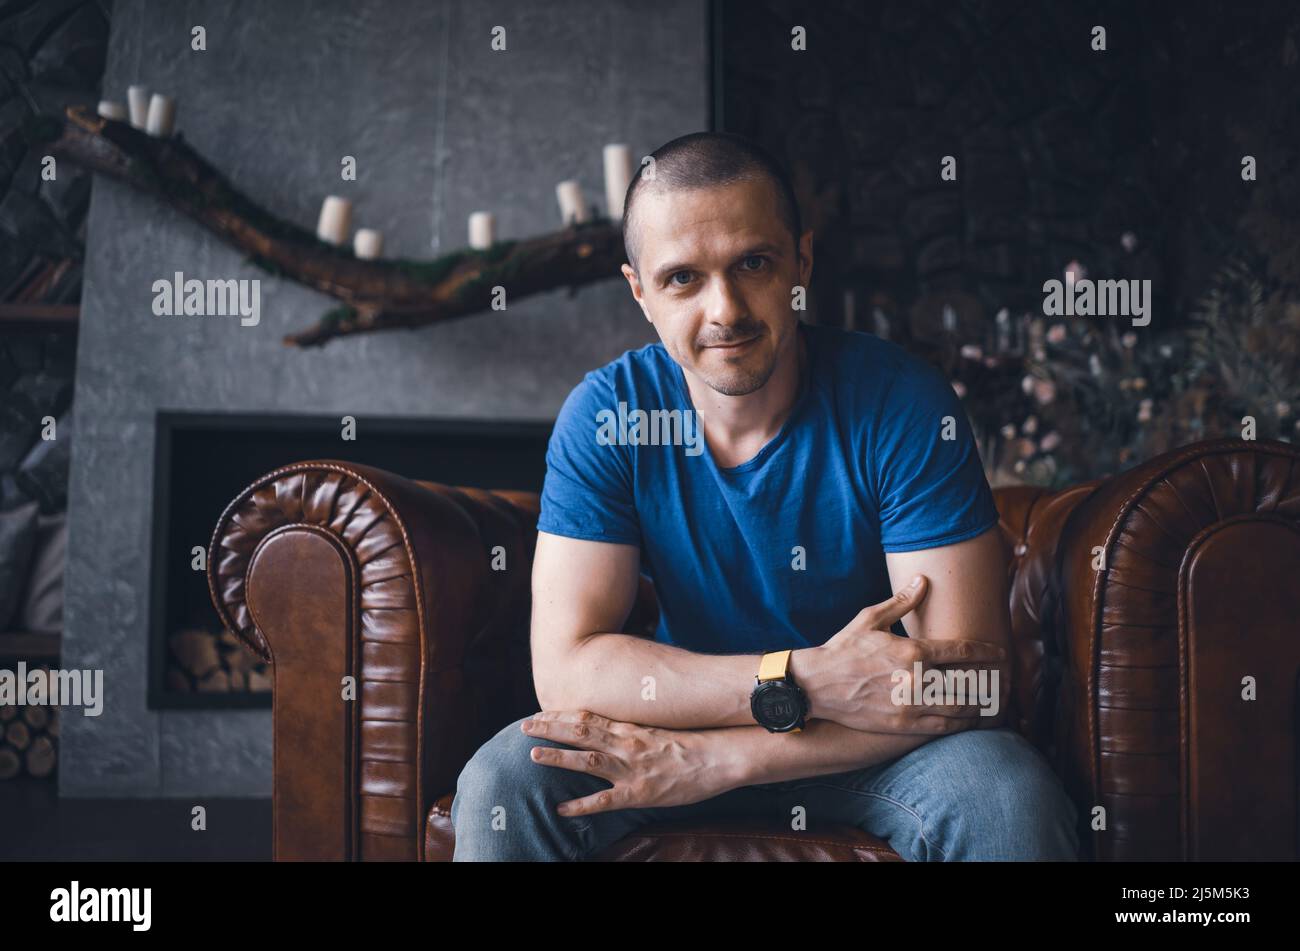 Adult man in blue t-shirt at home Stock Photo